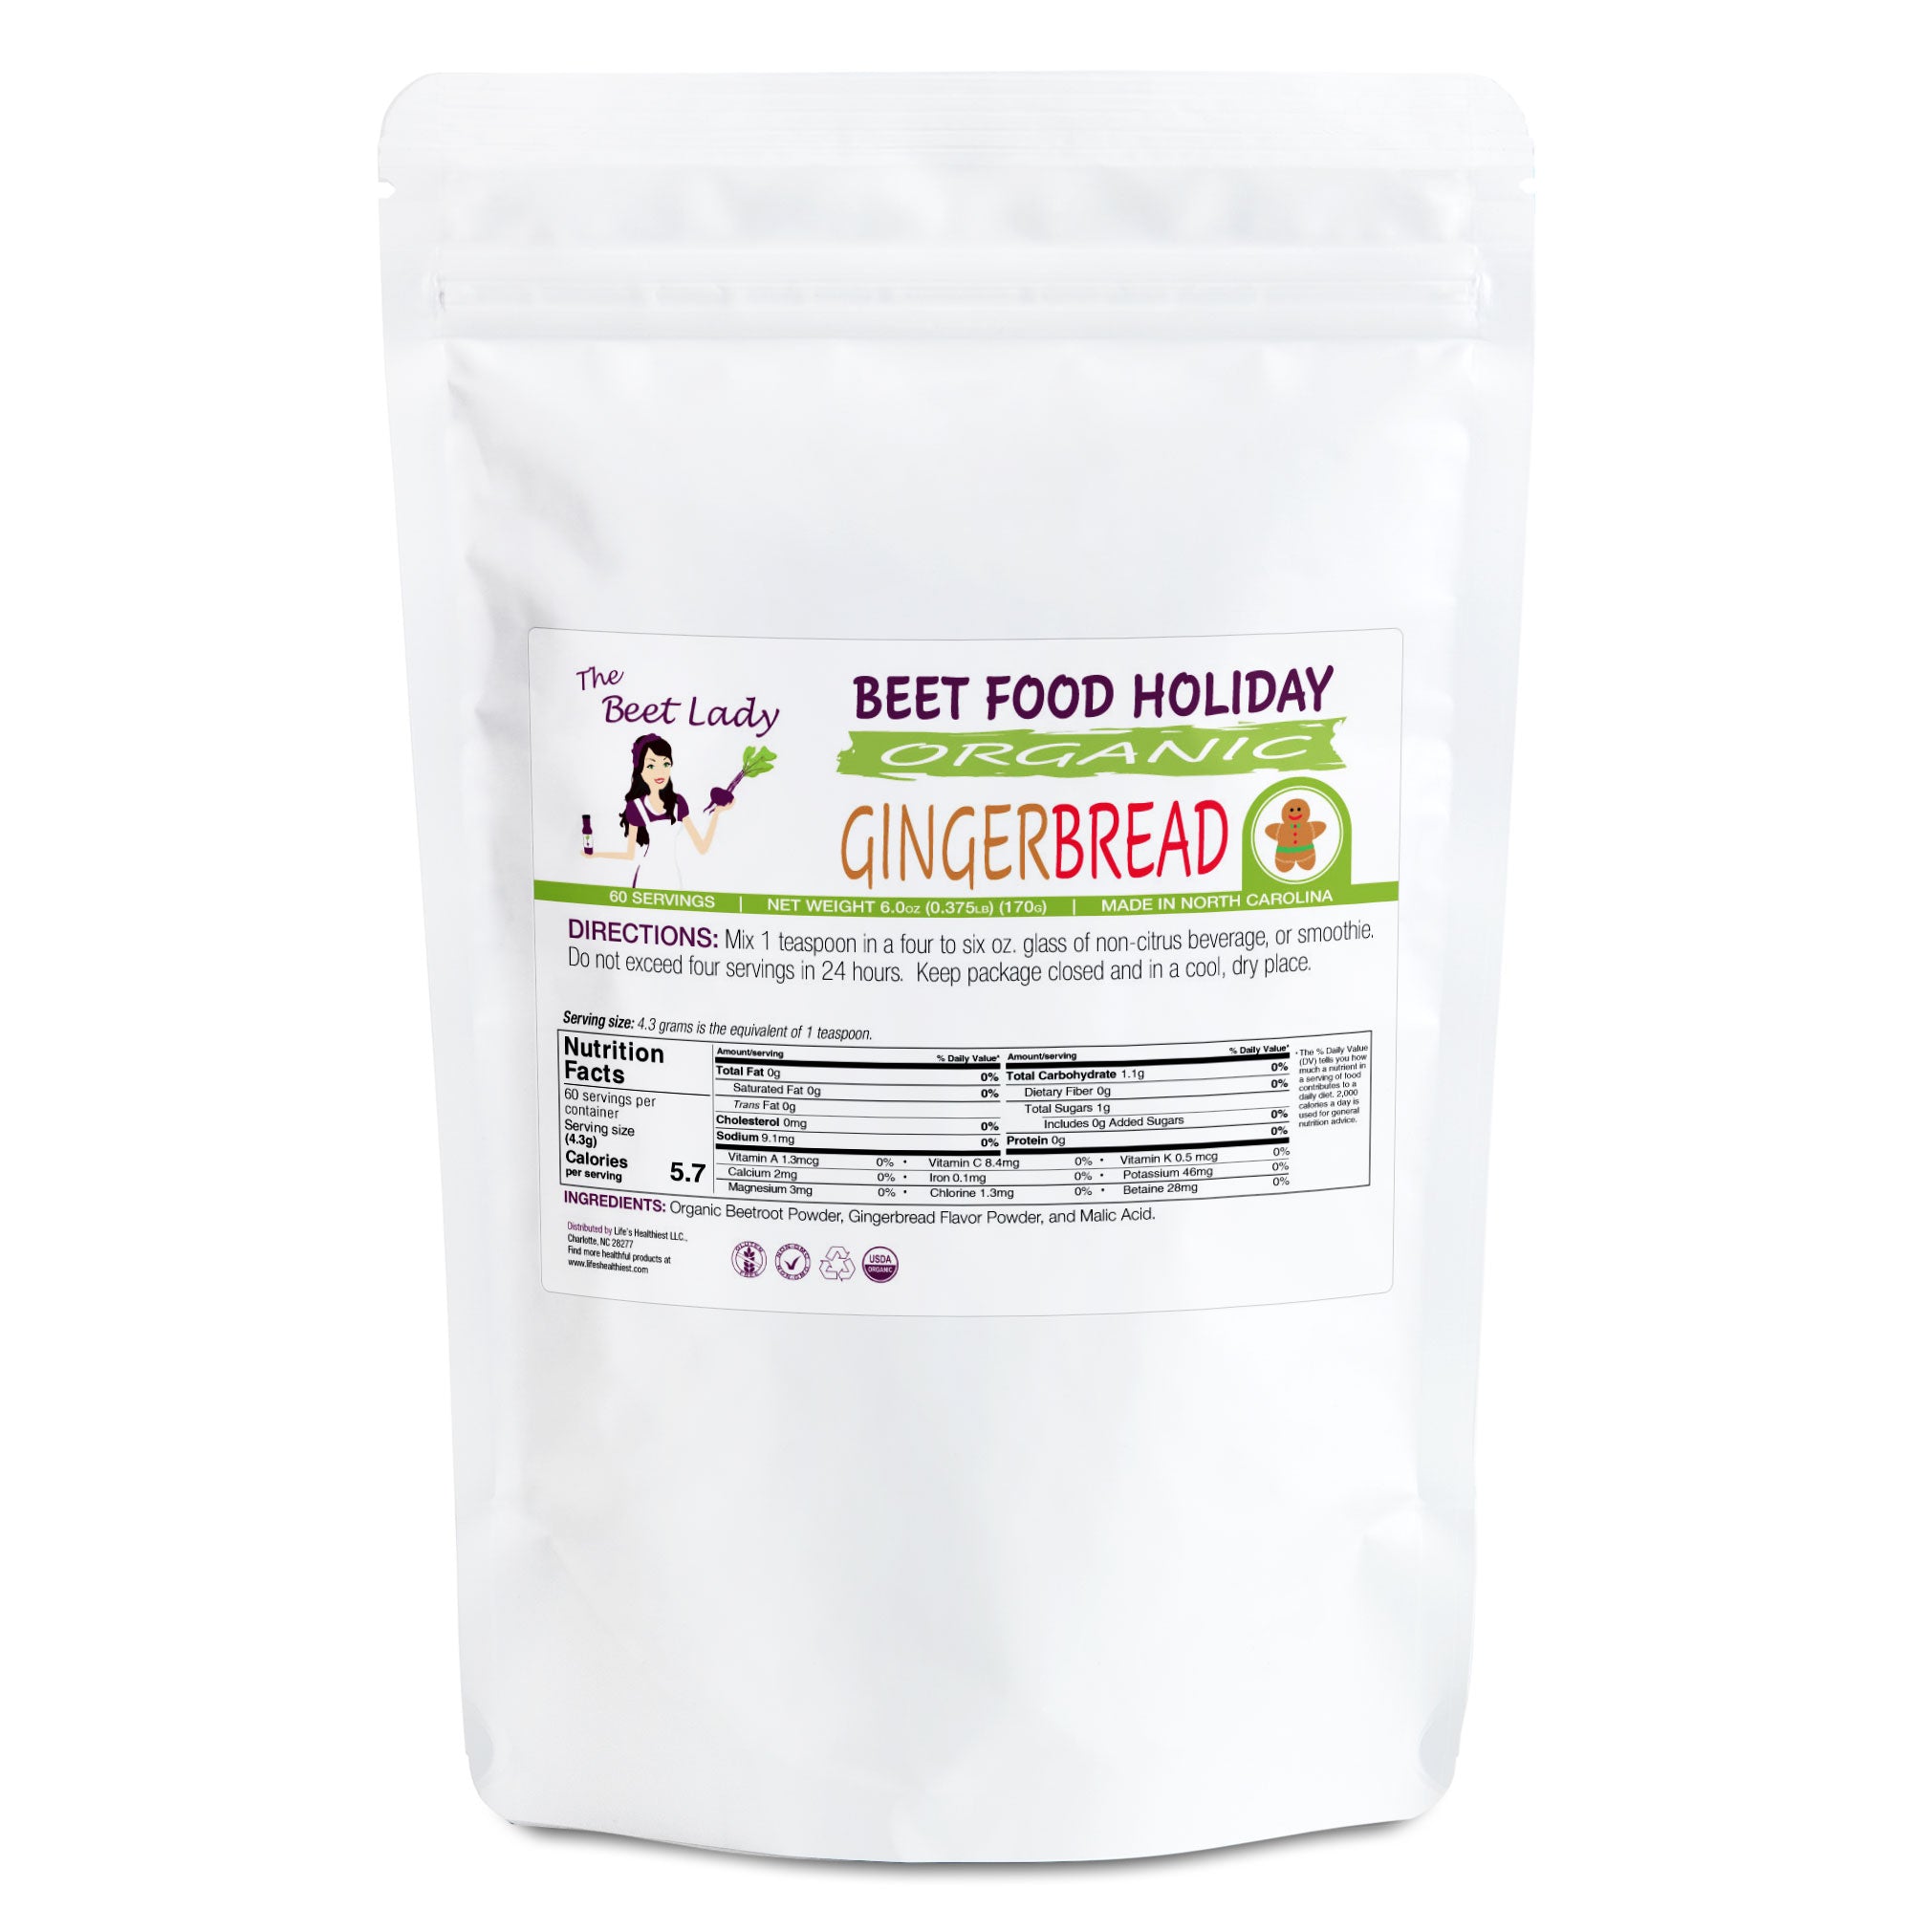 The Beet Lady HOLIDAY GINGER BREAD Beet Food Nutritional Therapy powder blend.  Organic, plant-based, non-GMO.  6 oz - 0